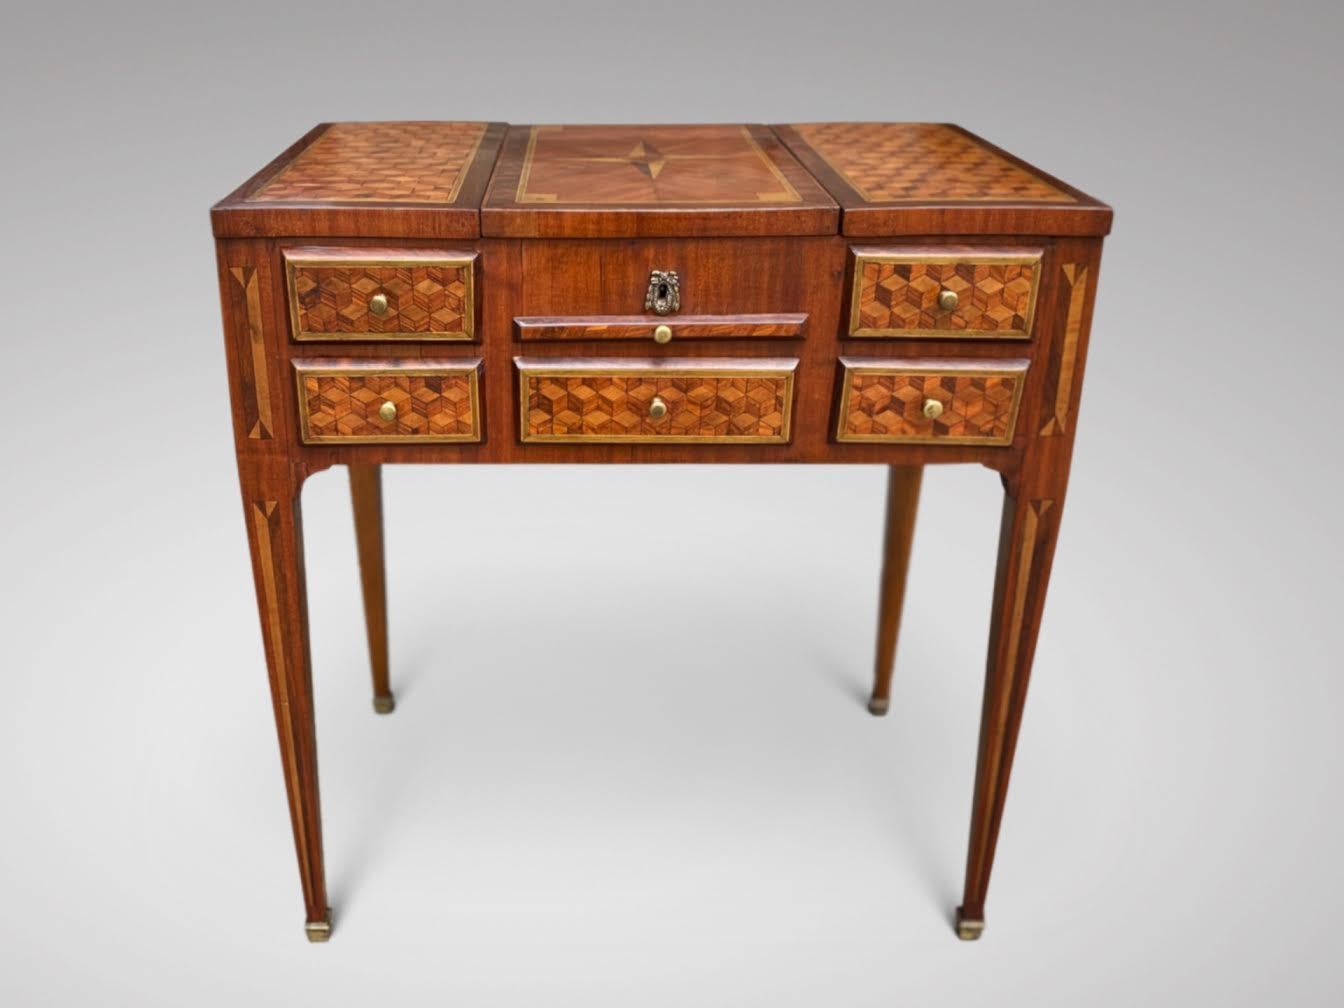 A very fine 18th century Louis XVI Geometrical marquetry dressing table or coiffeuse. The rectangular top divided into three framed parquetry panels, the outer two hinging outwards to reveal box sections, while the central section reveals an